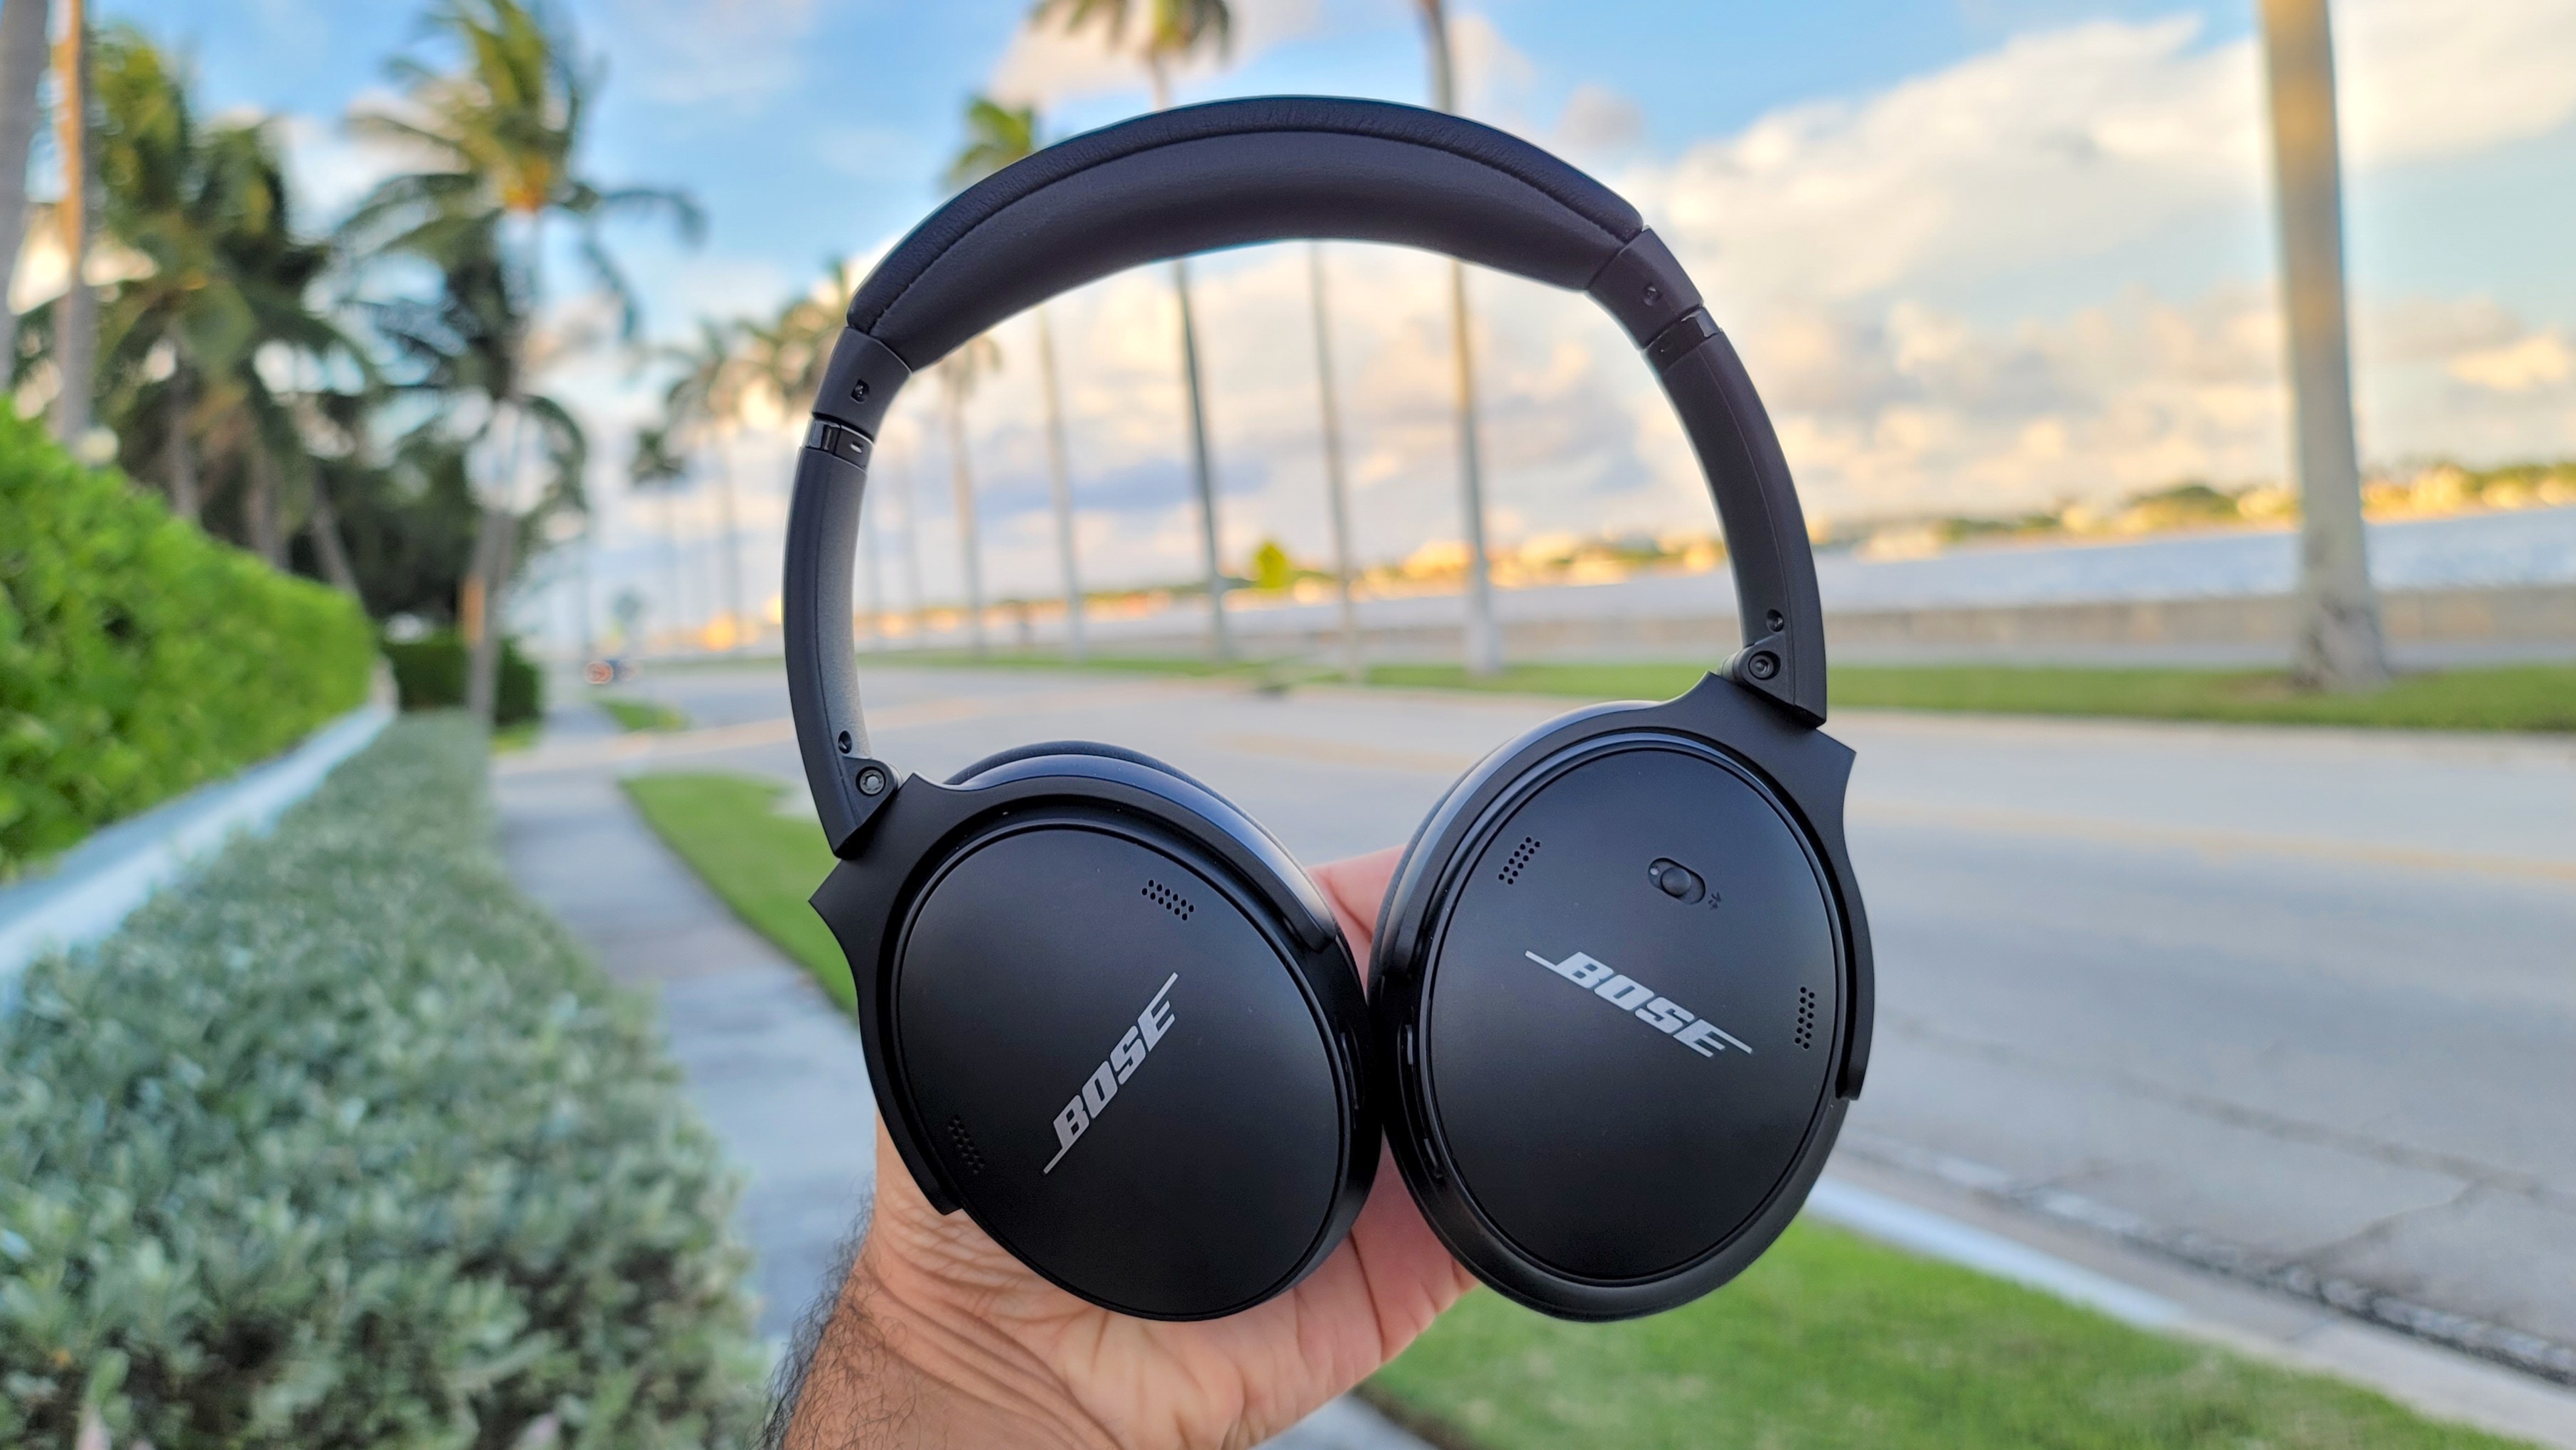 The Bose QuietComfort 45 headphones being held aloft against a backdrop of a coastal street with palm trees